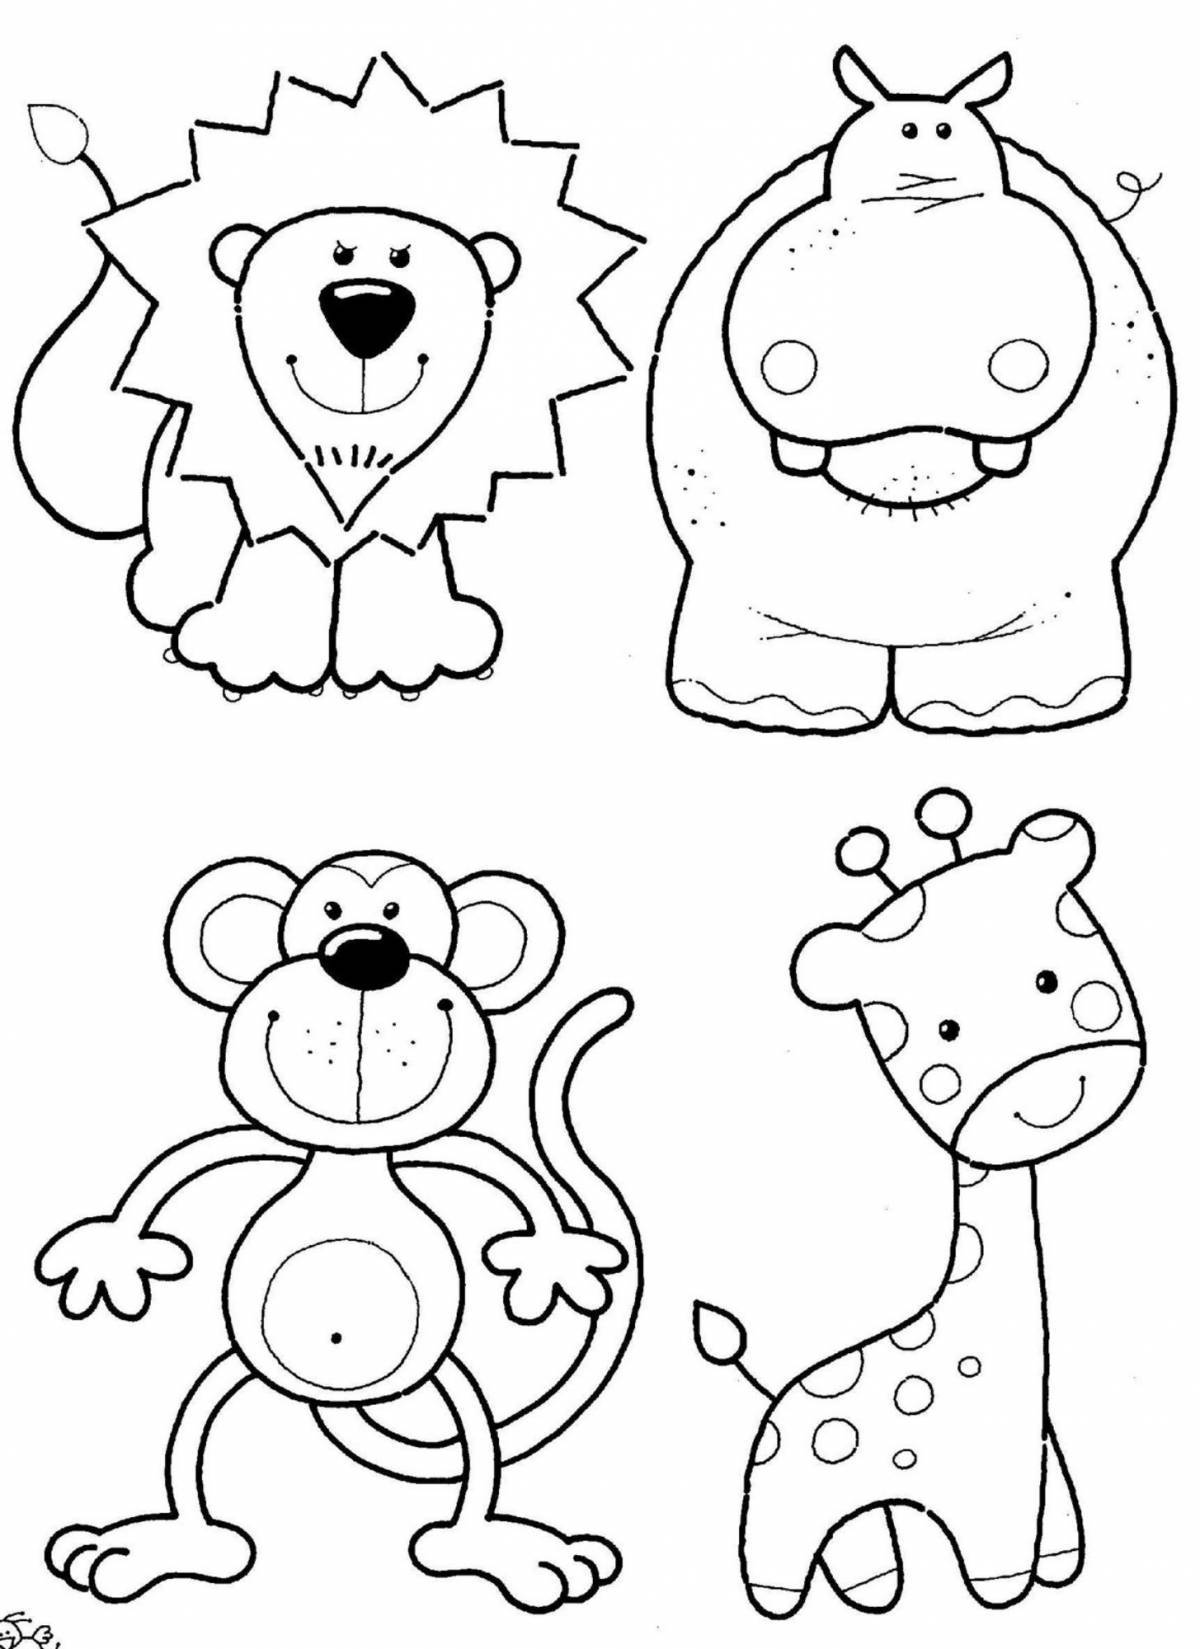 Adorable animal coloring book for kids 5-7 years old